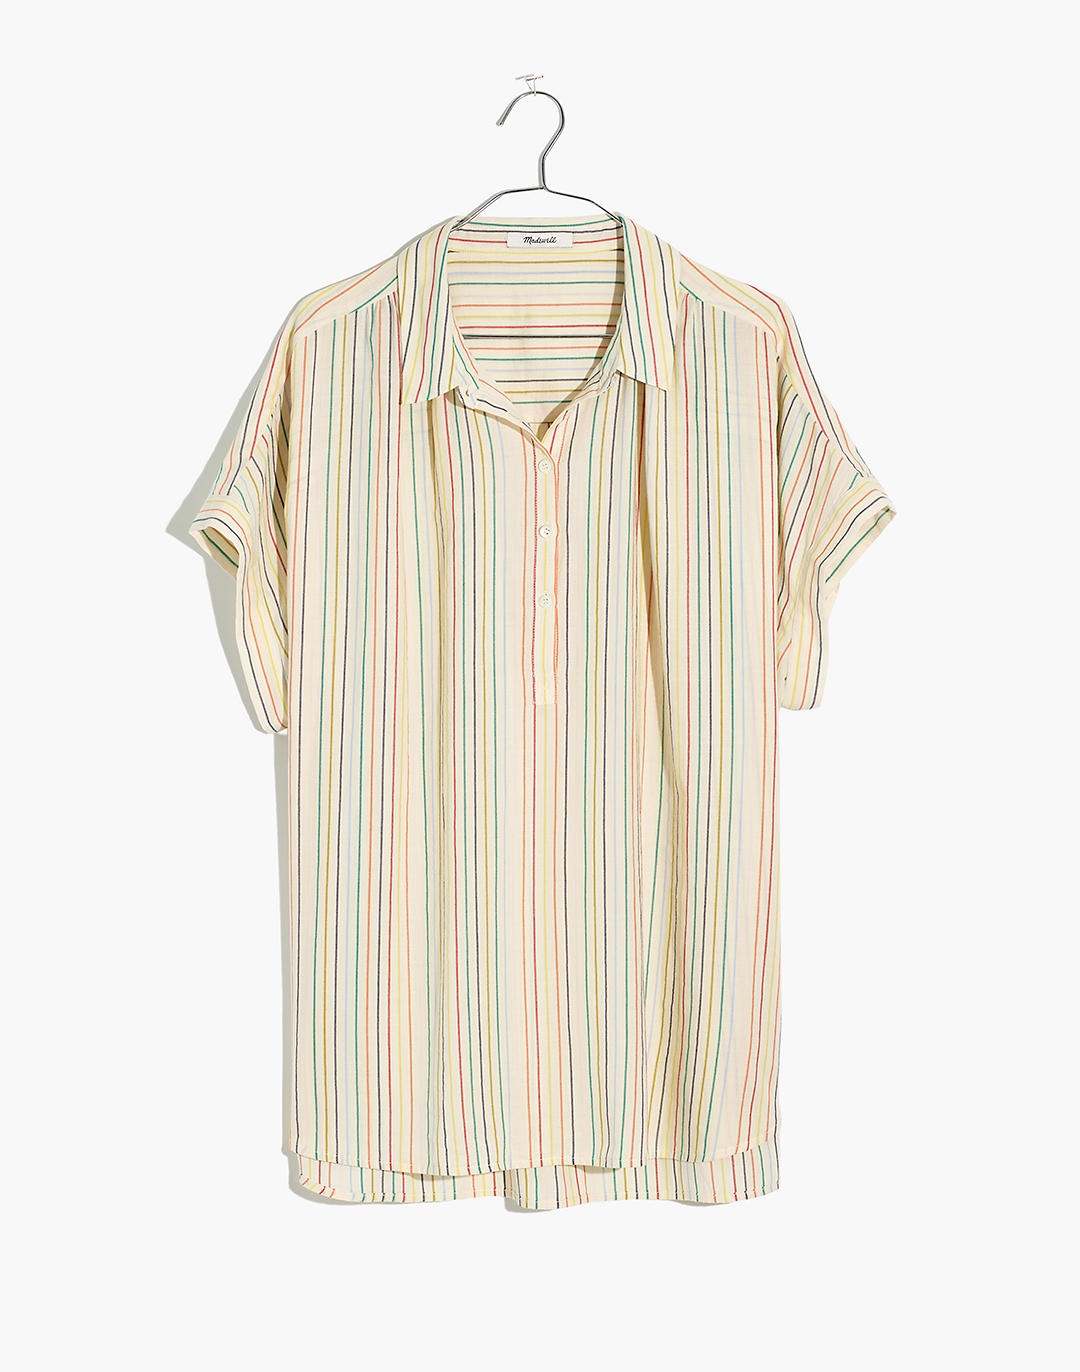 Central Popover Shirt in Textural Rainbow Stripe